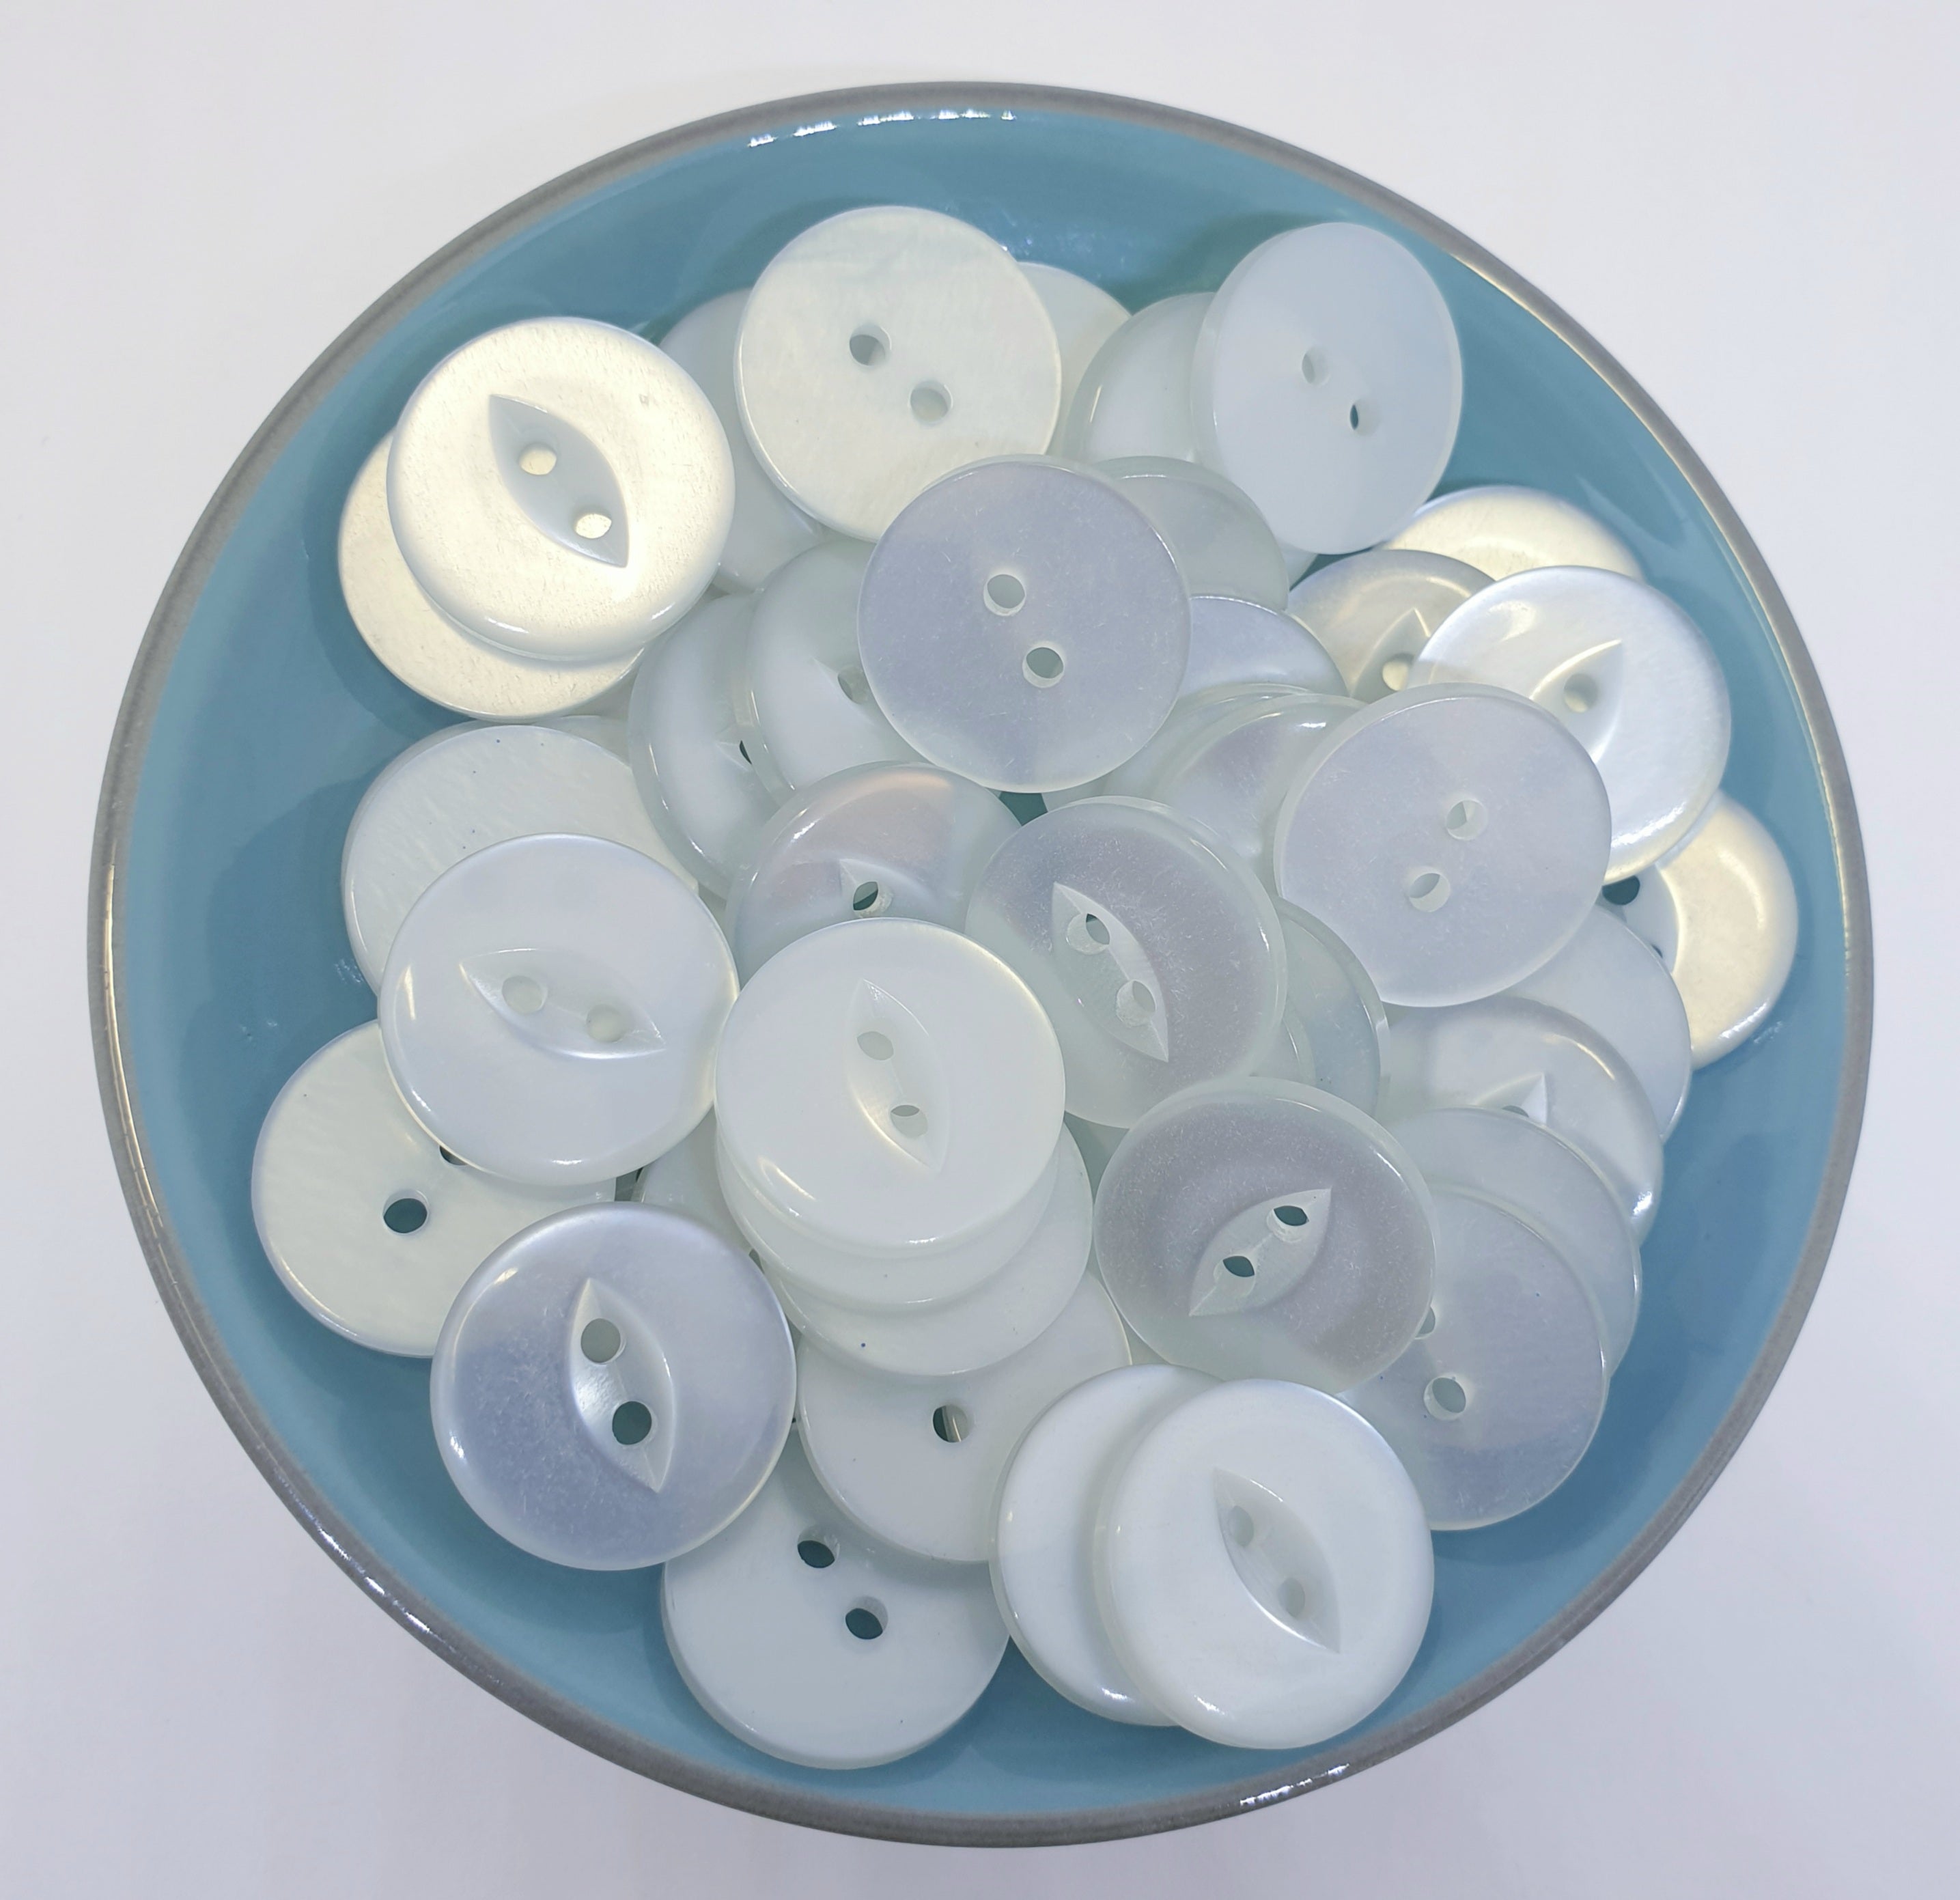 MajorCrafts 40pcs 19mm White Pearlescent Fish Eye 2 Holes Round Acrylic Sewing Buttons